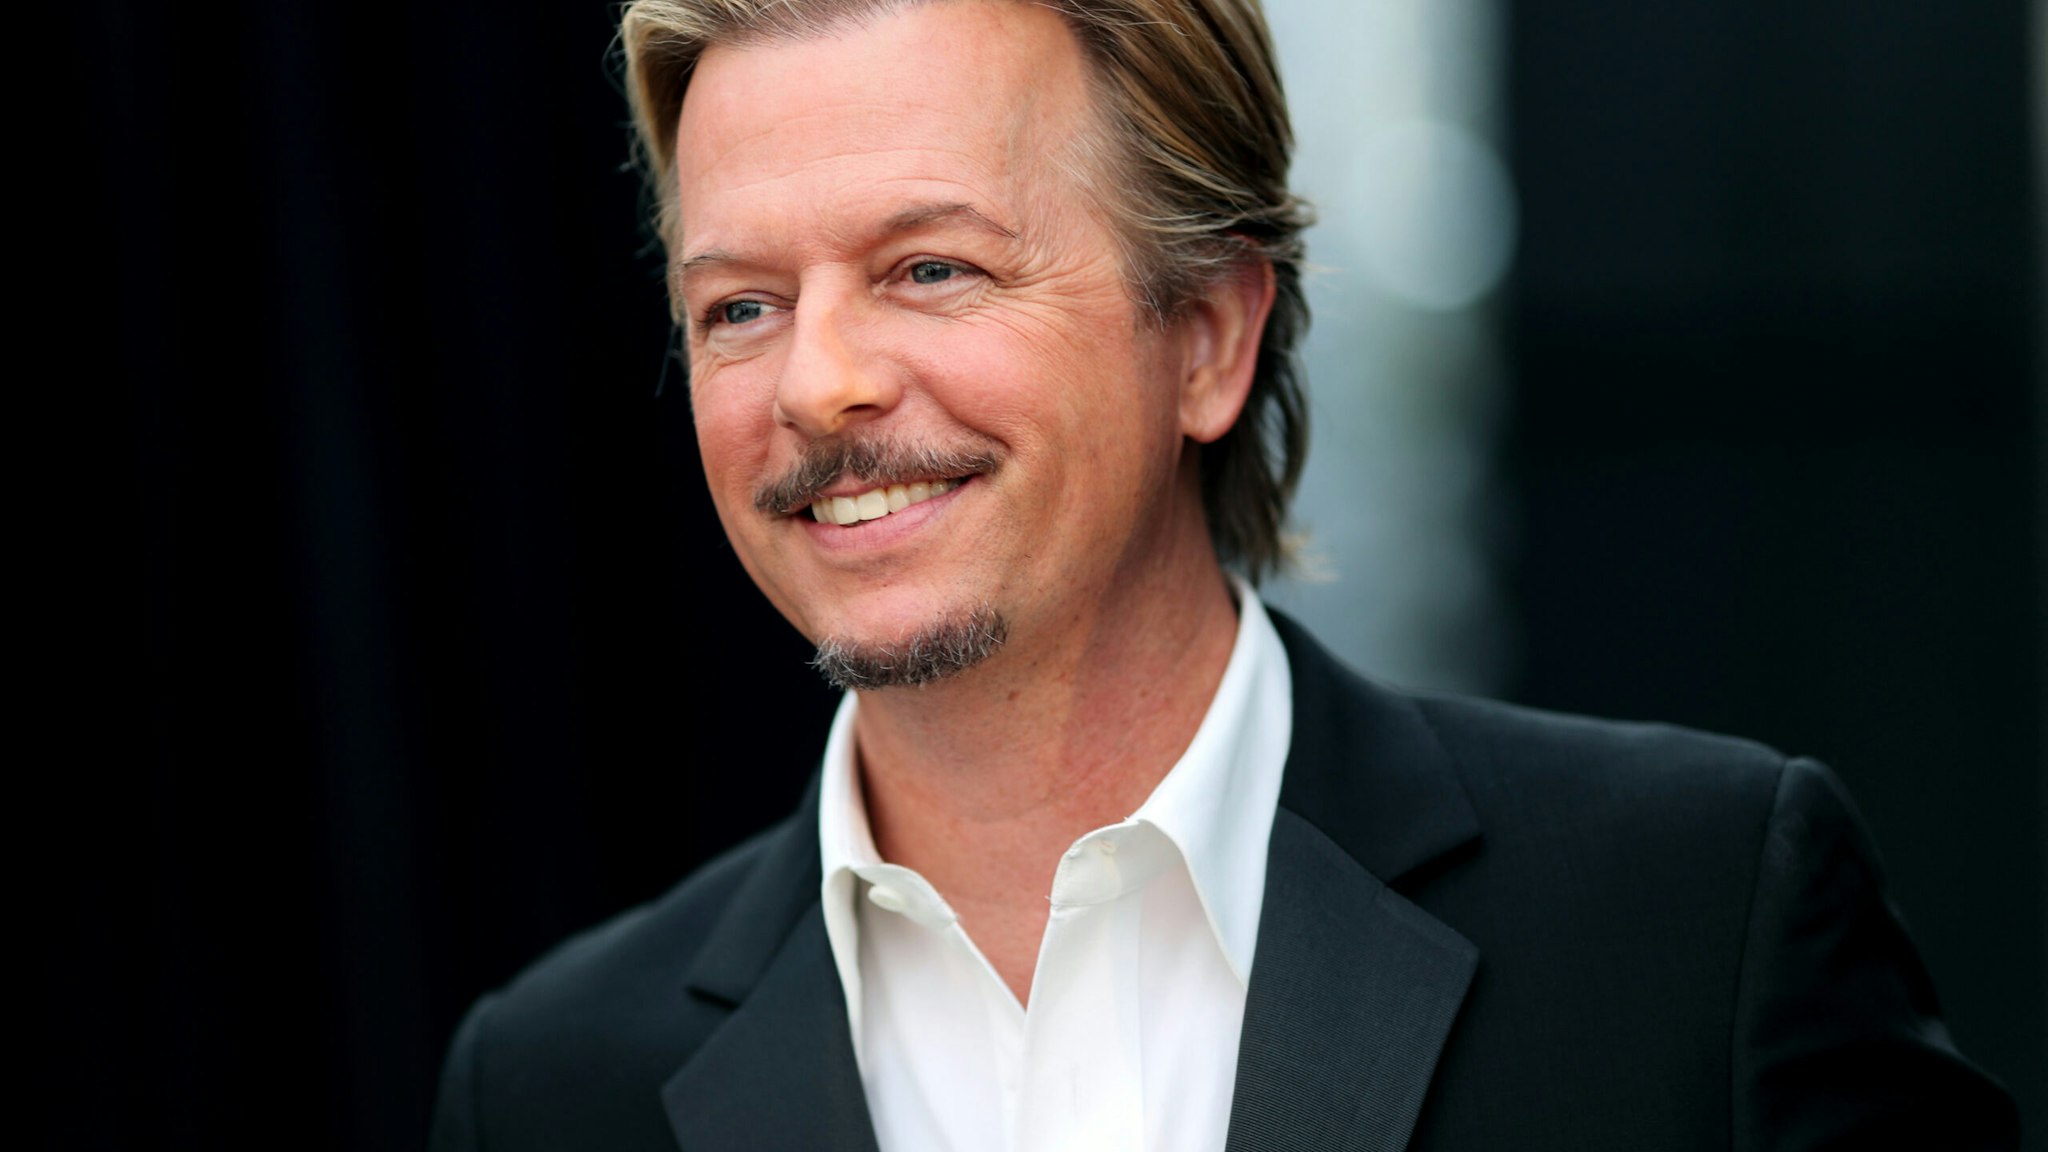 LOS ANGELES, CA - AUGUST 27: Roast Master David Spade attends The Comedy Central Roast of Rob Lowe at Sony Studios on August 27, 2016 in Los Angeles, California. (Photo by Christopher Polk/Getty Images)